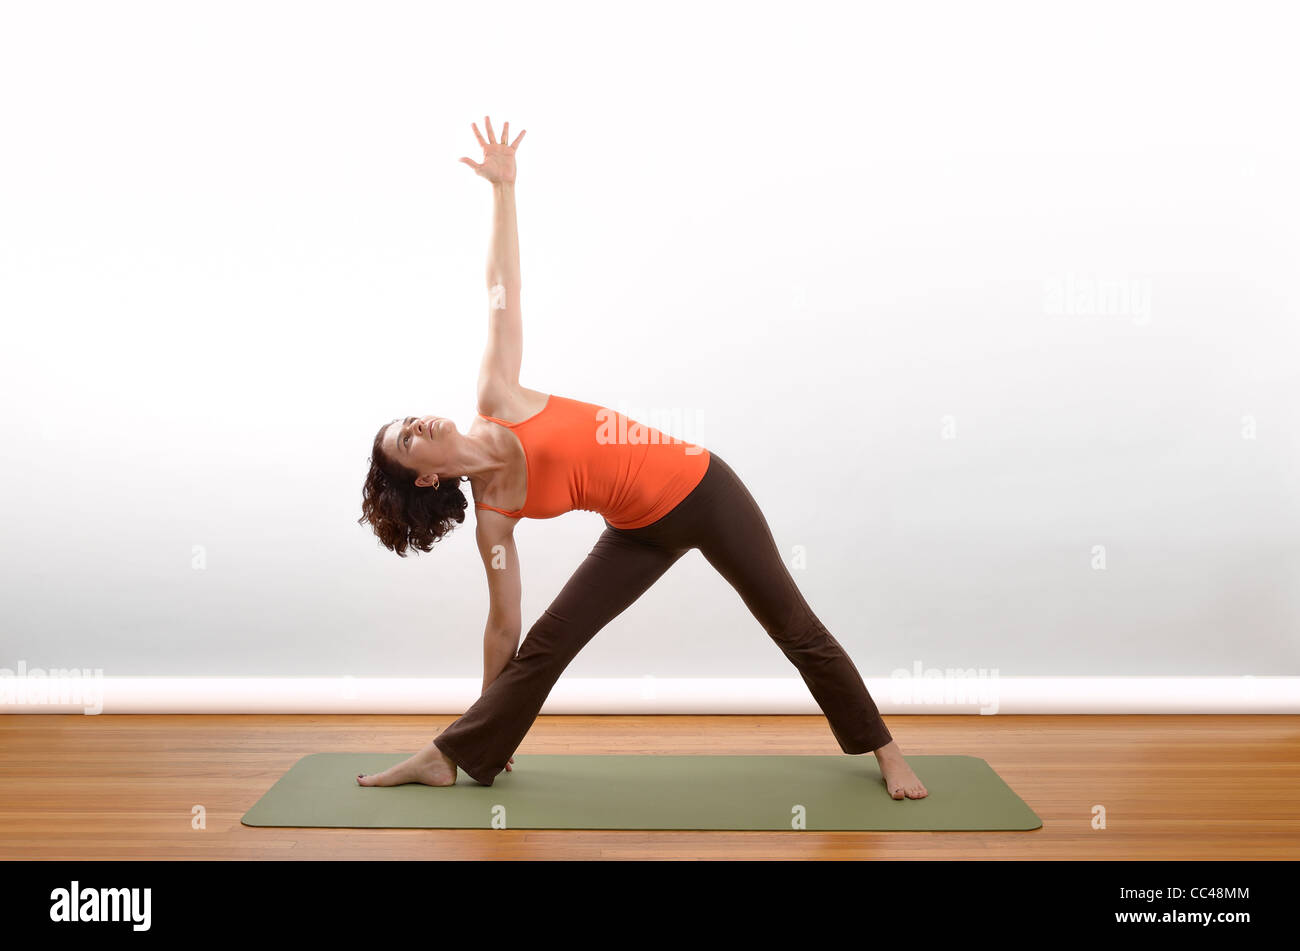 A woman demonstrates the Triangle position in yoga. Stock Photo